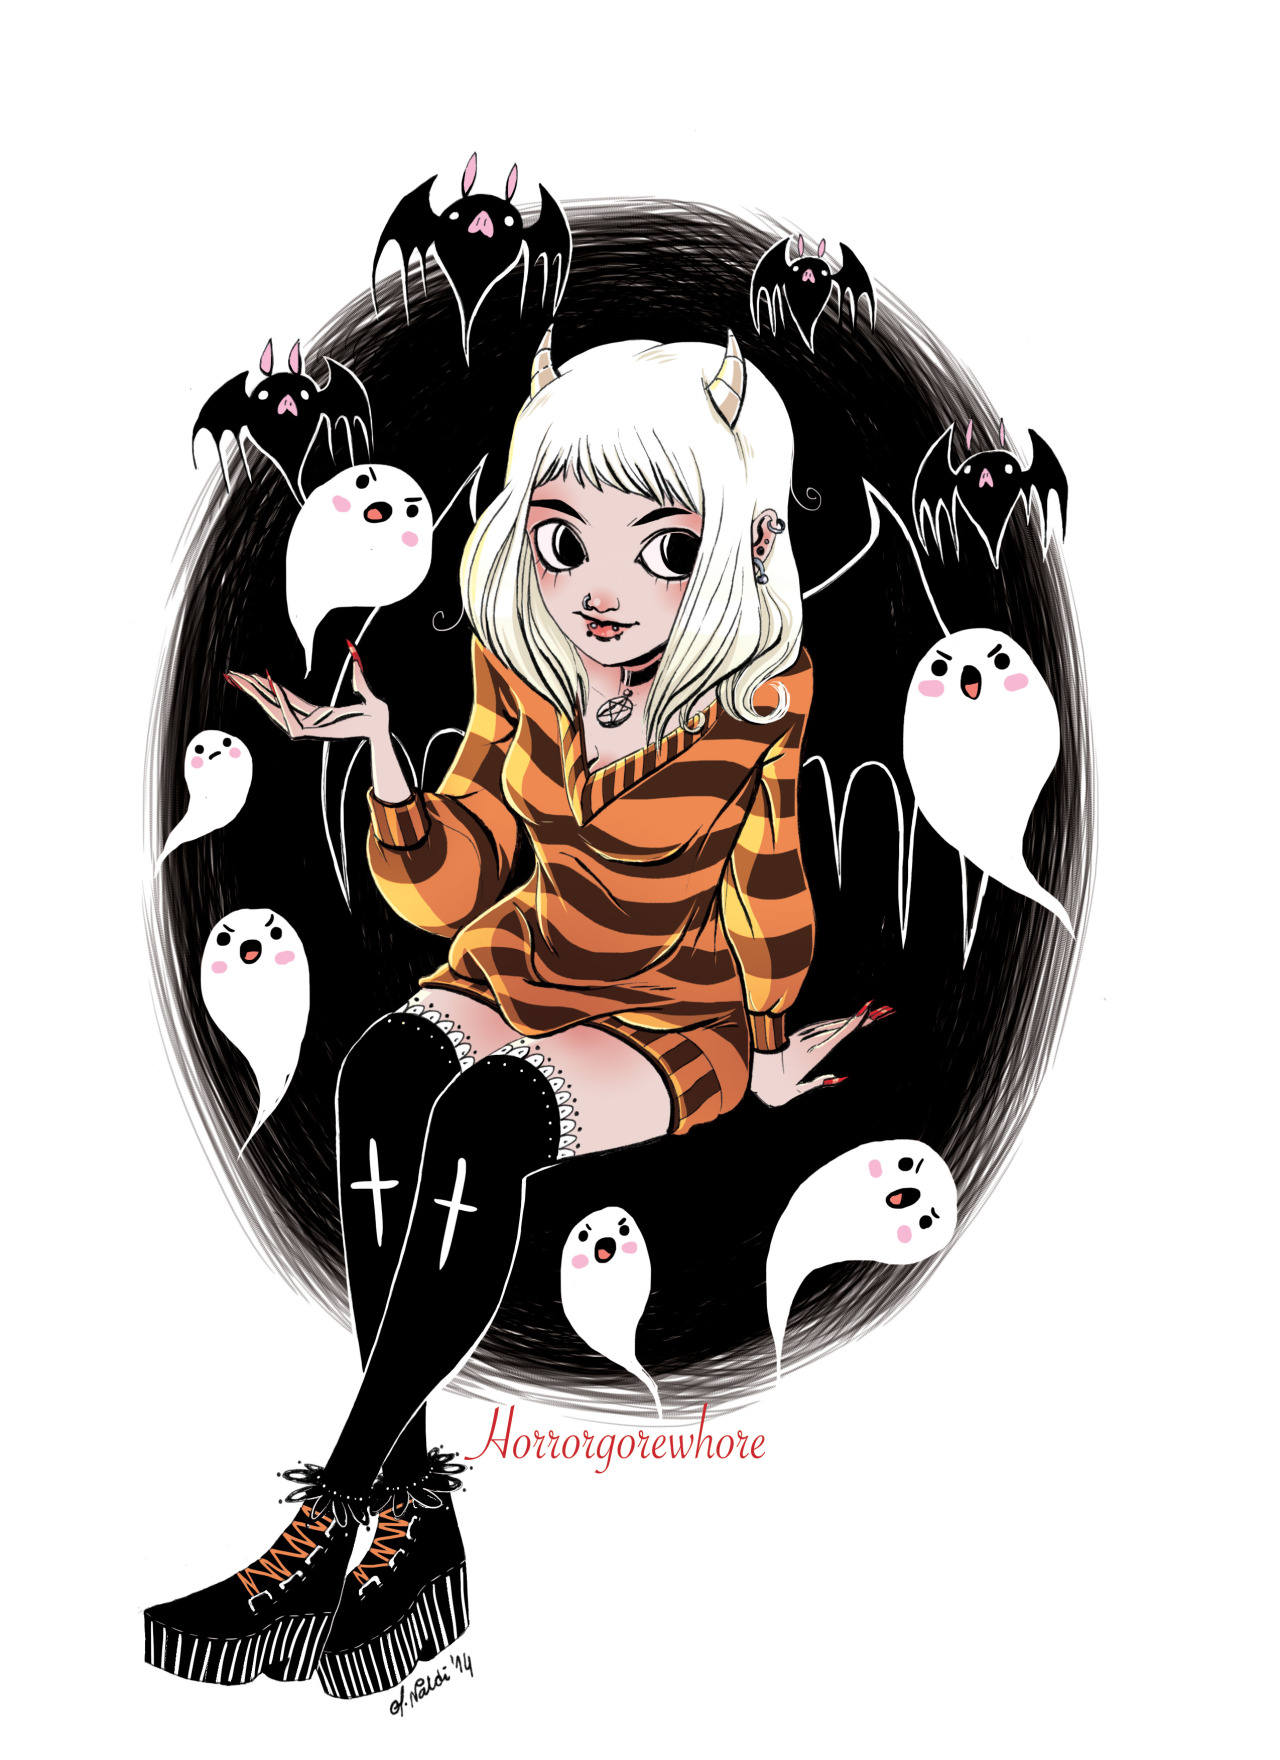 horrorgorewhore:  I have never felt more adorable. This spooky adorable drawing of